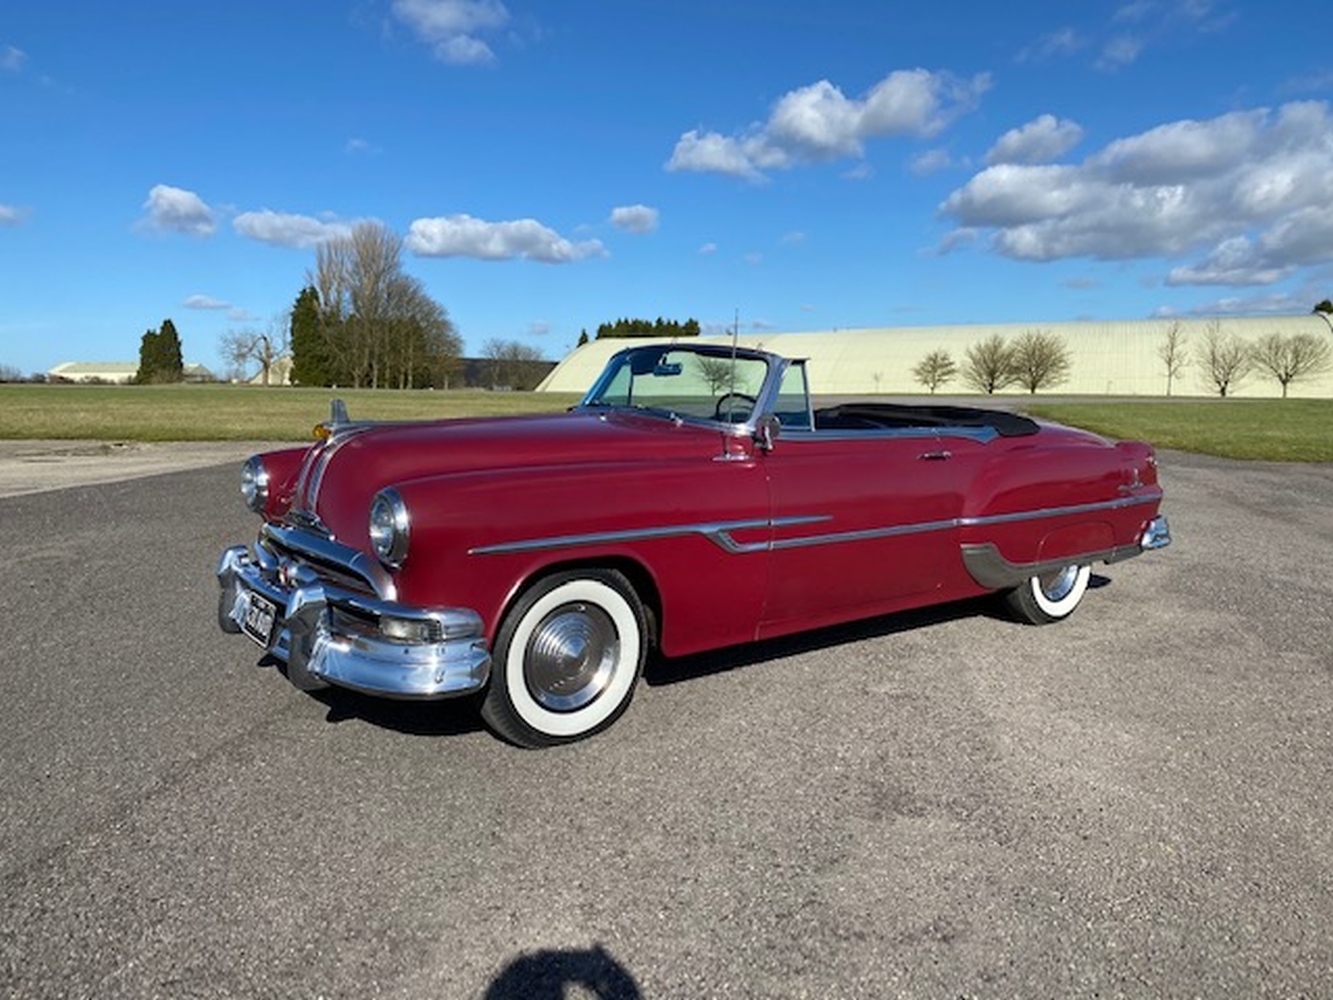 1953 Pontiac Chieftain Deluxe Eight Convertible Coupe Chassis no. P8XH88350